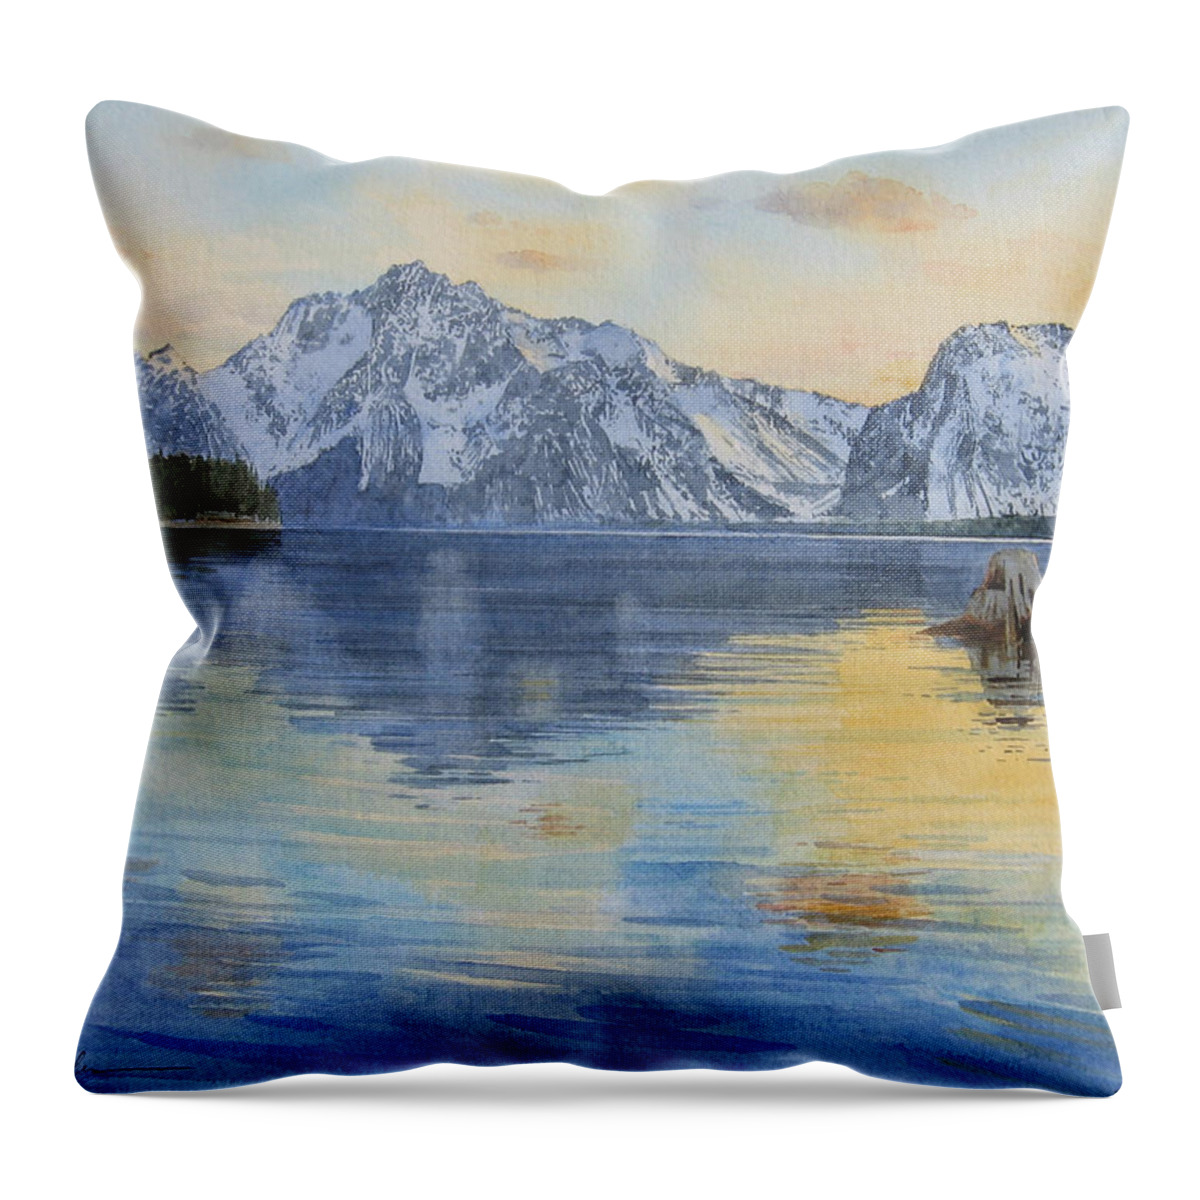 Tetons Throw Pillow featuring the painting Tetons by Tyler Ryder